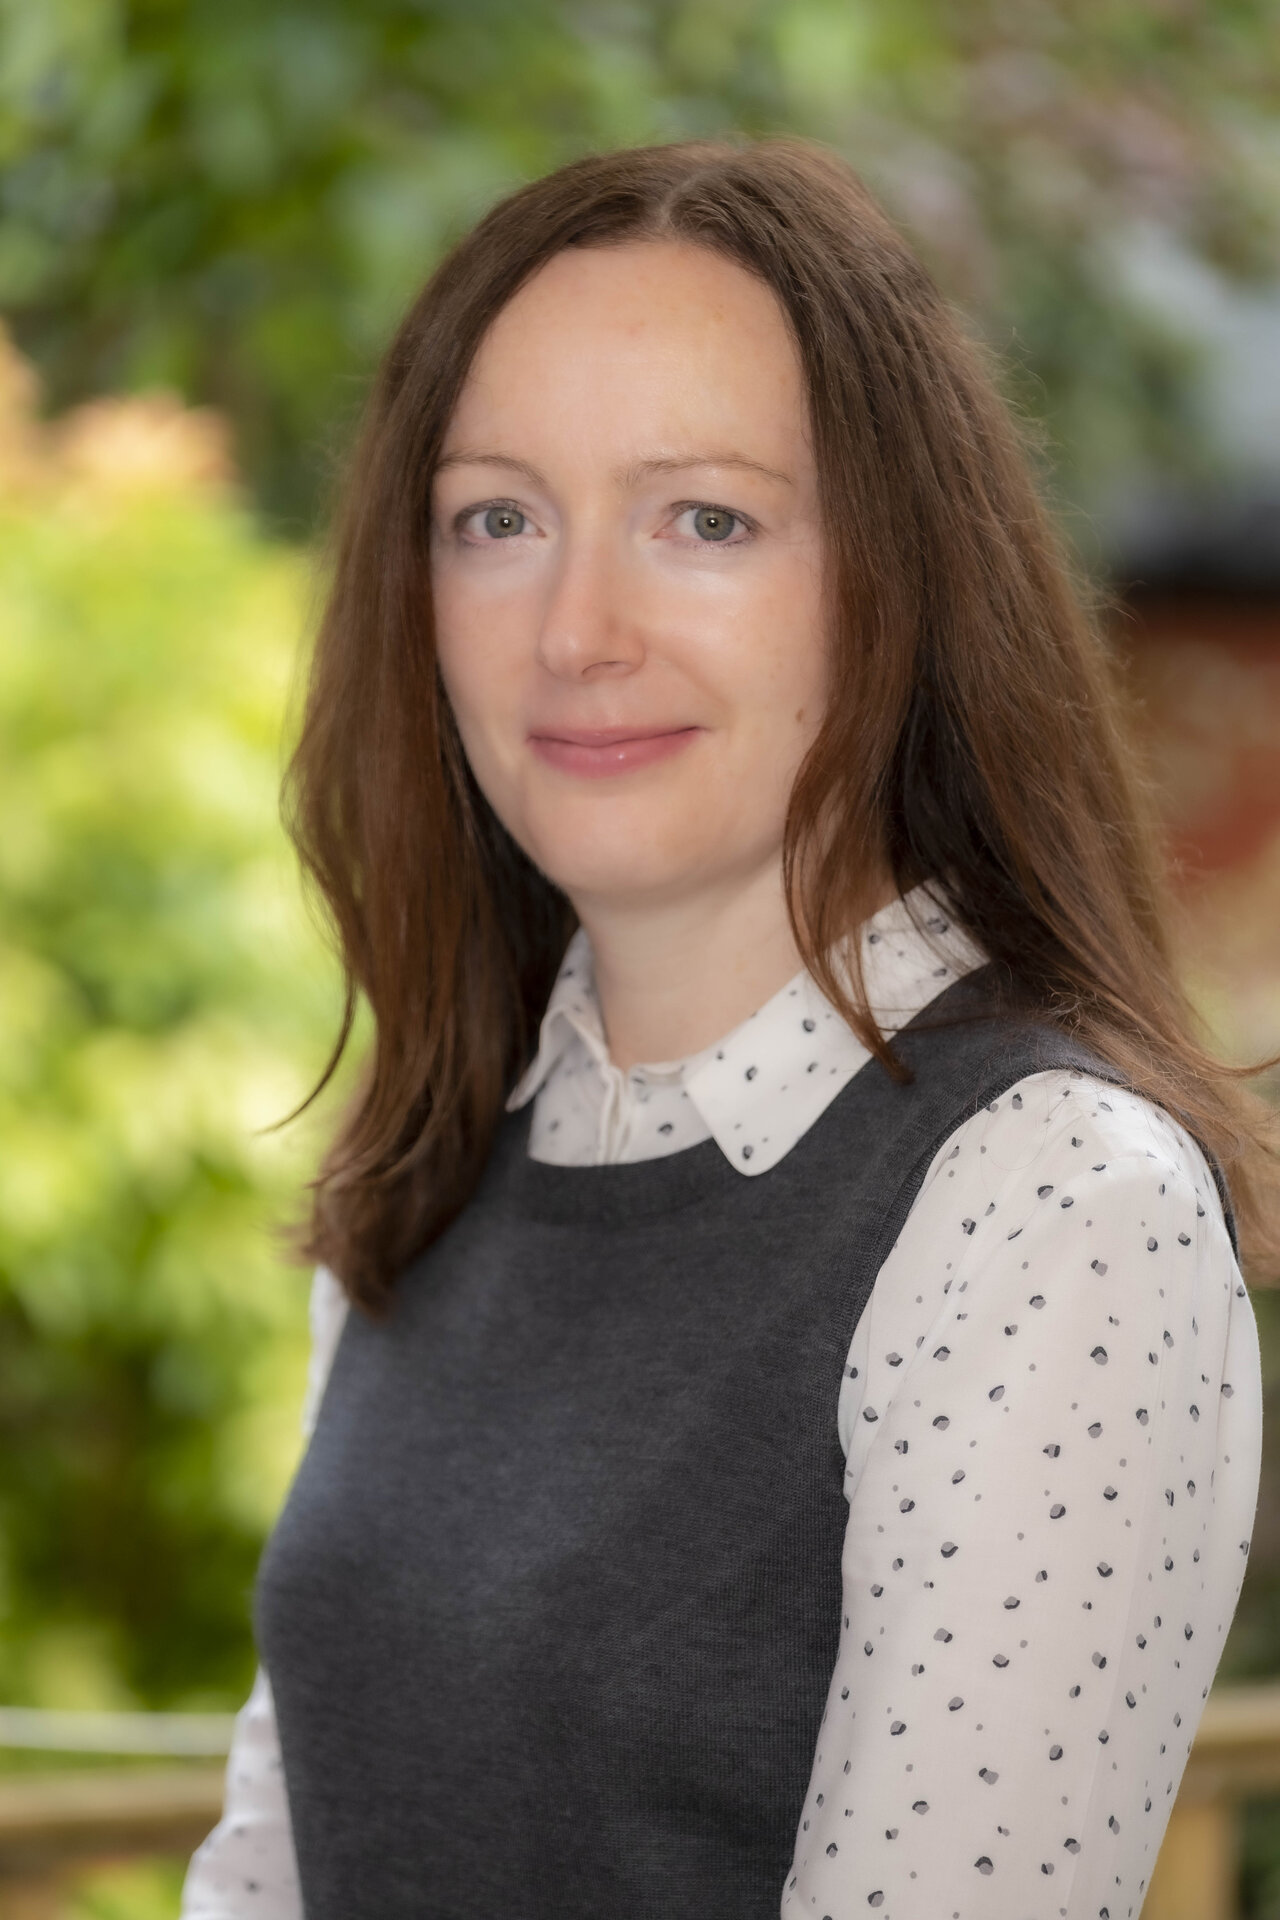 Dr Jo McParland is a GCU psychology lecturer and an expert in chronic pain psychology. Link to Covid related news article: https://www.connected.gcu.ac.uk/News/Lists/Posts/Post.aspx?List=624d8c9e%2D6eb7%2D4204%2D9241%2Ddcf8eb932174&ID=2654&Web=979576bc%2D33fd%2D4348%2D9319%2D55235c82fafc